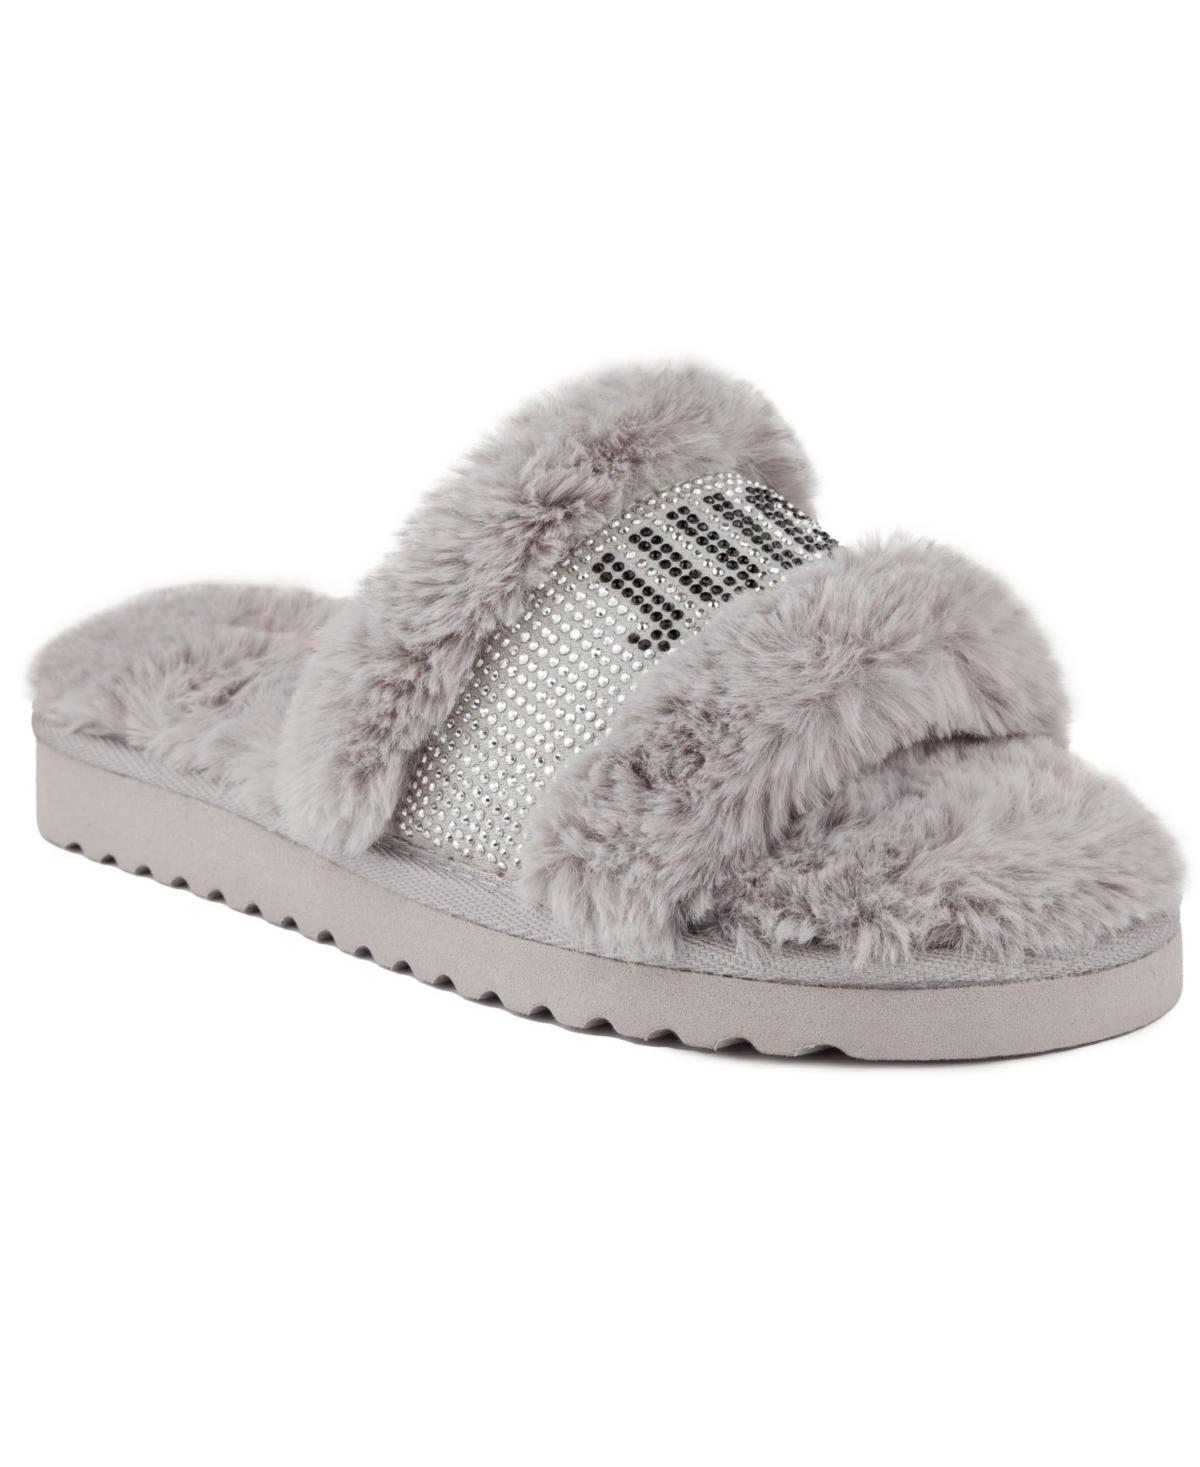 Women's Halo Faux Fur Slippers - Red - Manmade